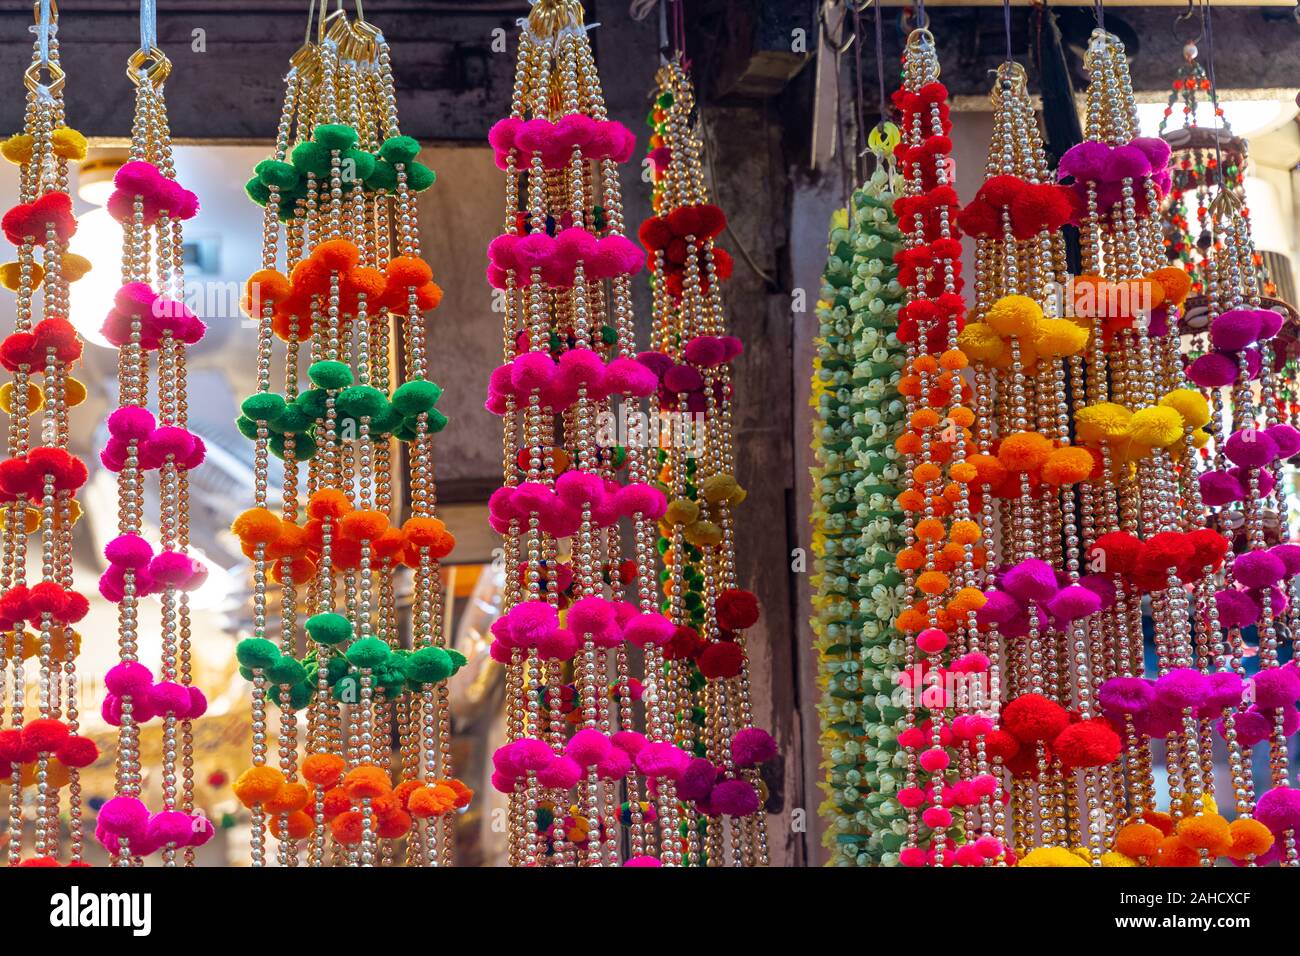 Colorful hanging decorations on display for sale in Chandi Chowk Old Delhi. Stock Photo